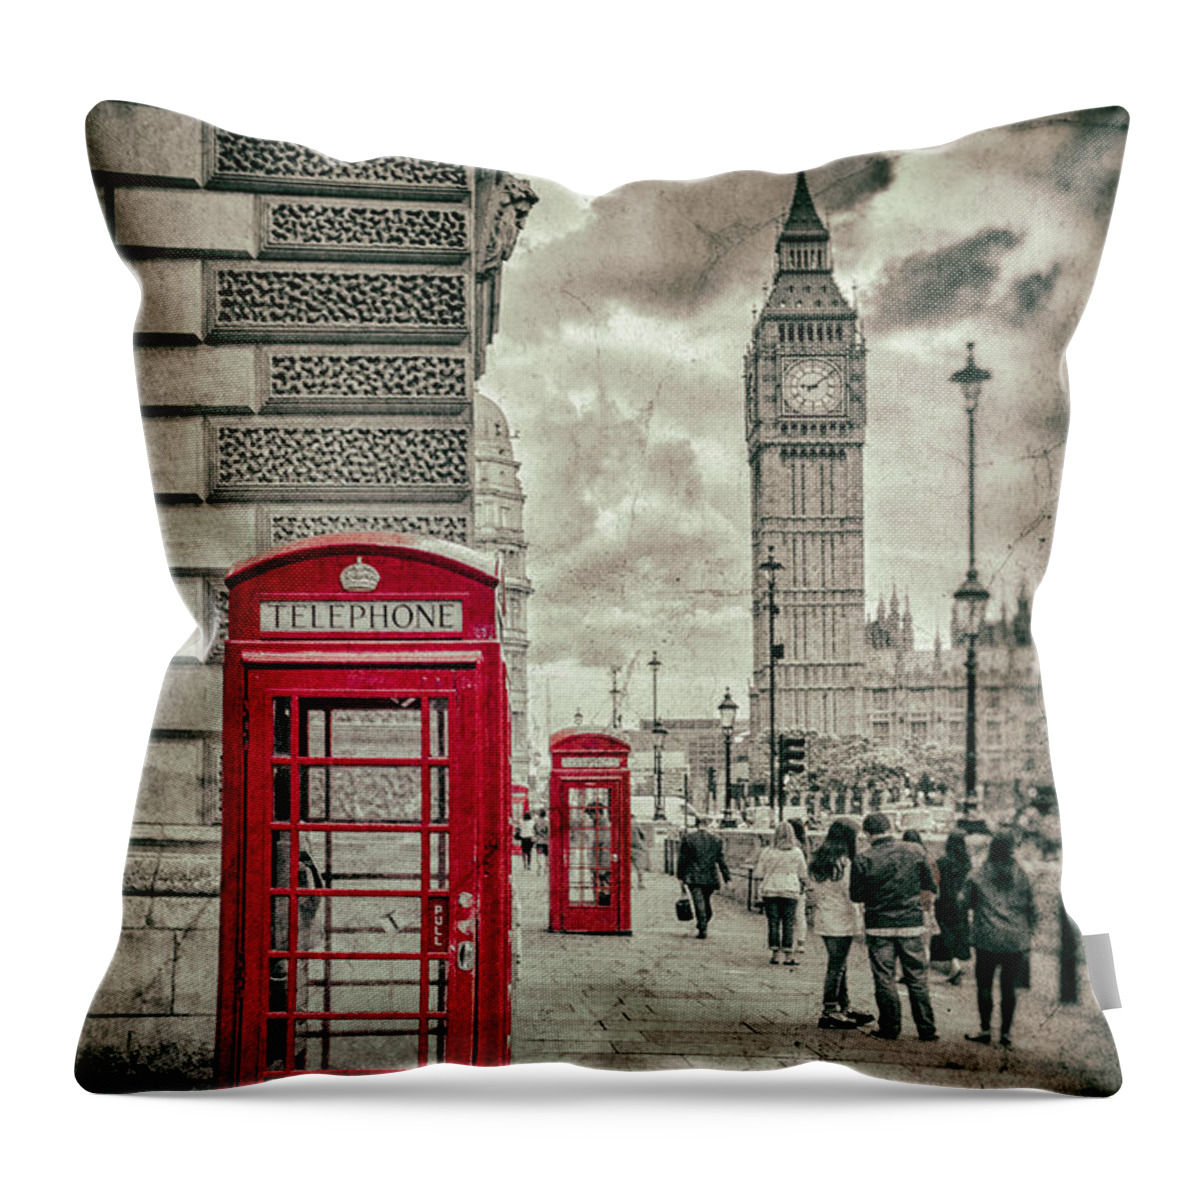 London Throw Pillow featuring the photograph London Telephone Box by Nigel R Bell